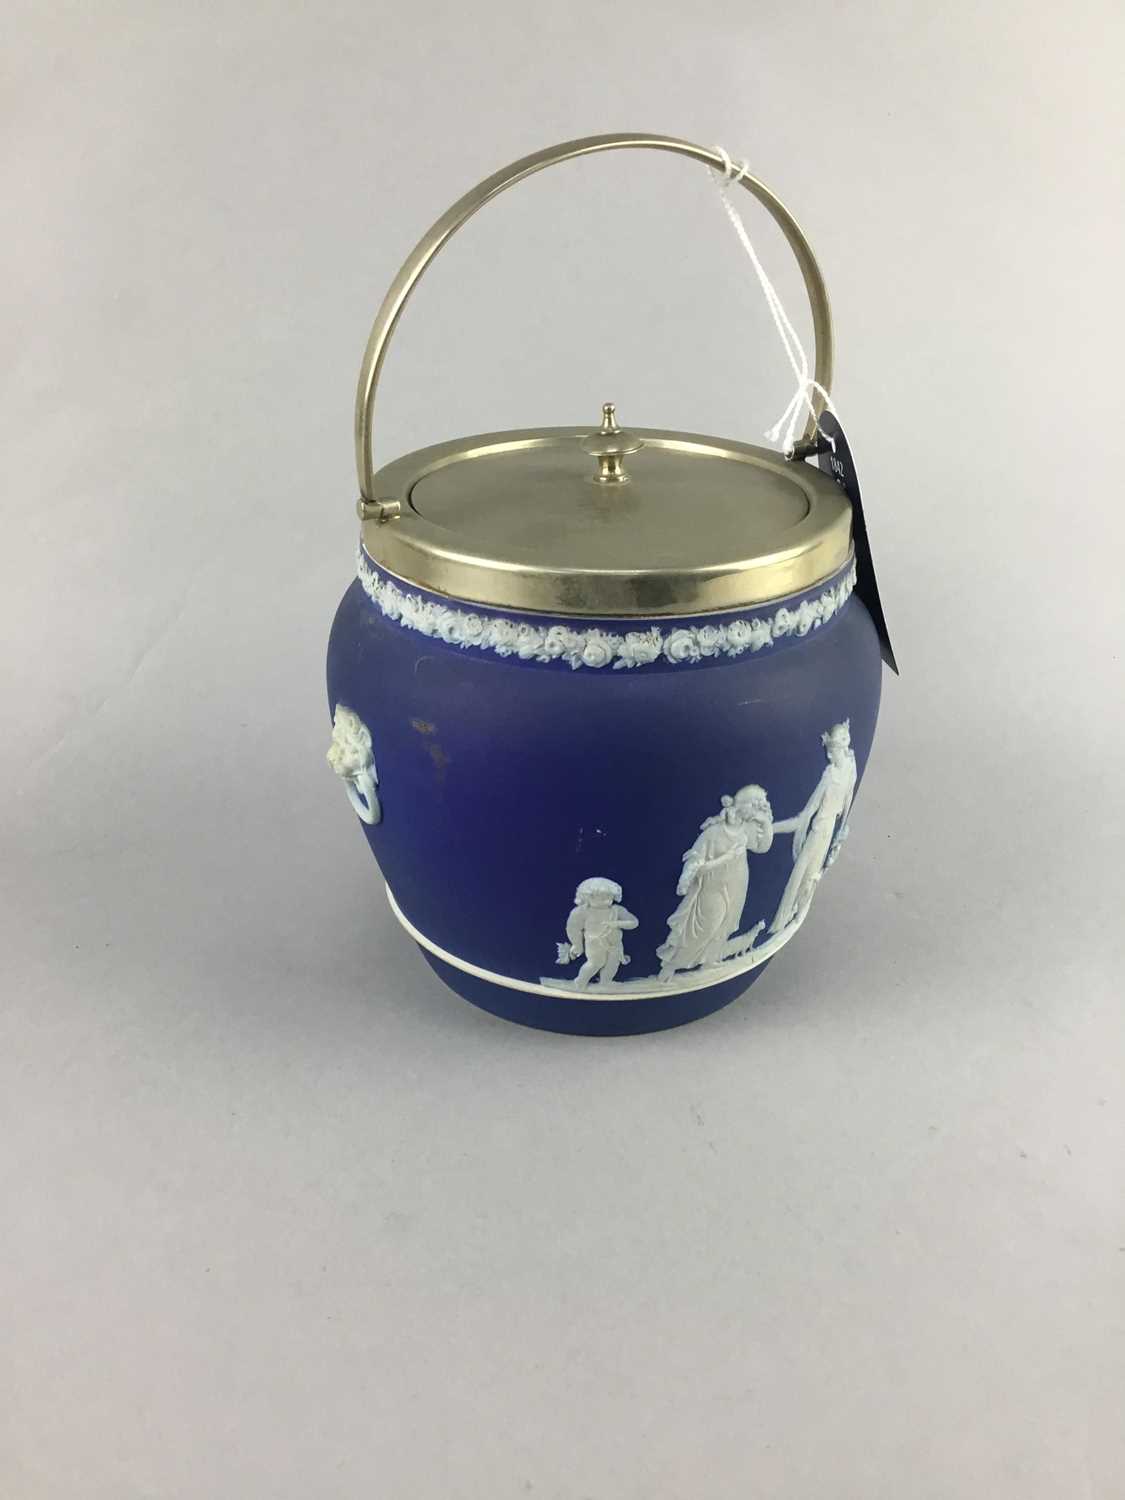 Lot 3 - AN EARLY 20TH CENTURY WEDGWOOD JASPERWARE BISCUIT BARREL